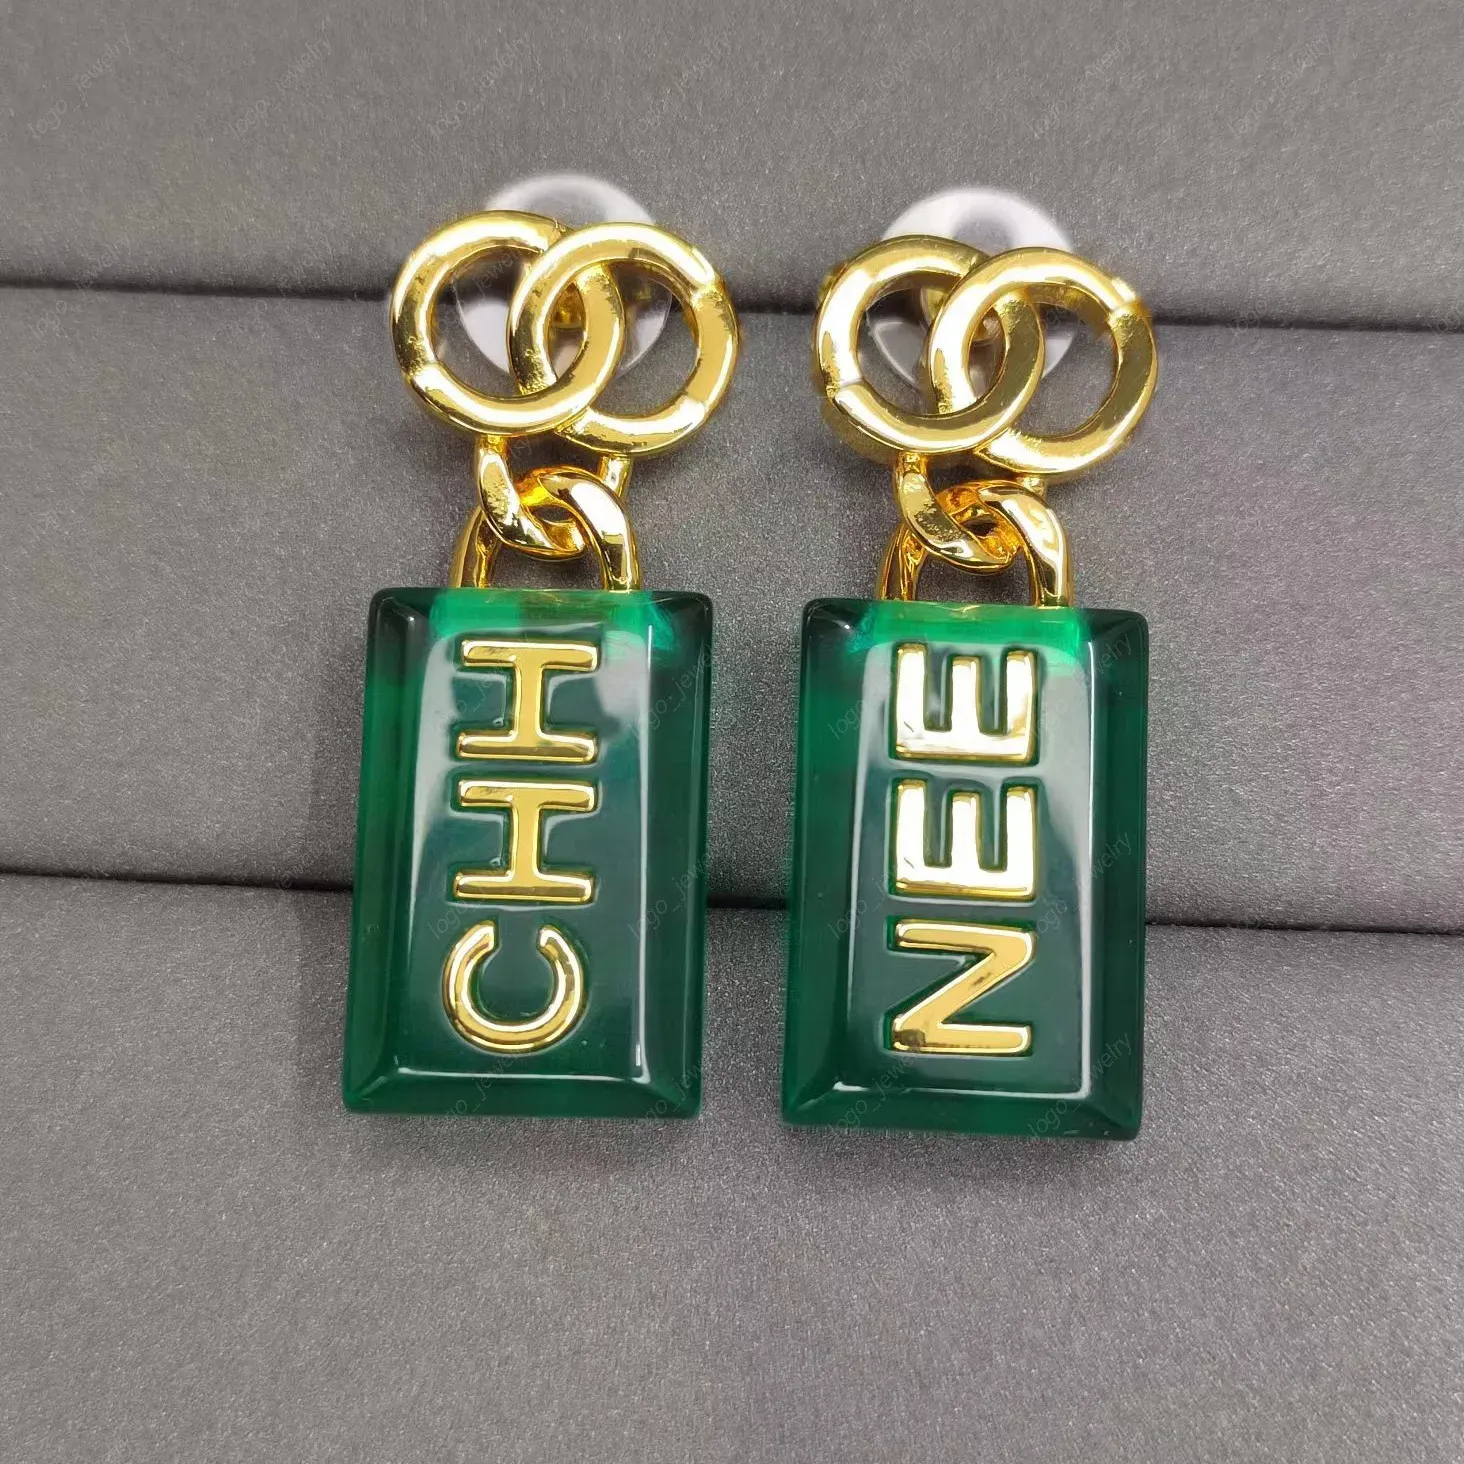 Luxury Designer Fashion Dangle Chandelier Earrings 18K gold green acrylic pendant earrings Women's wedding party engagement Gift jewelry high quality with box